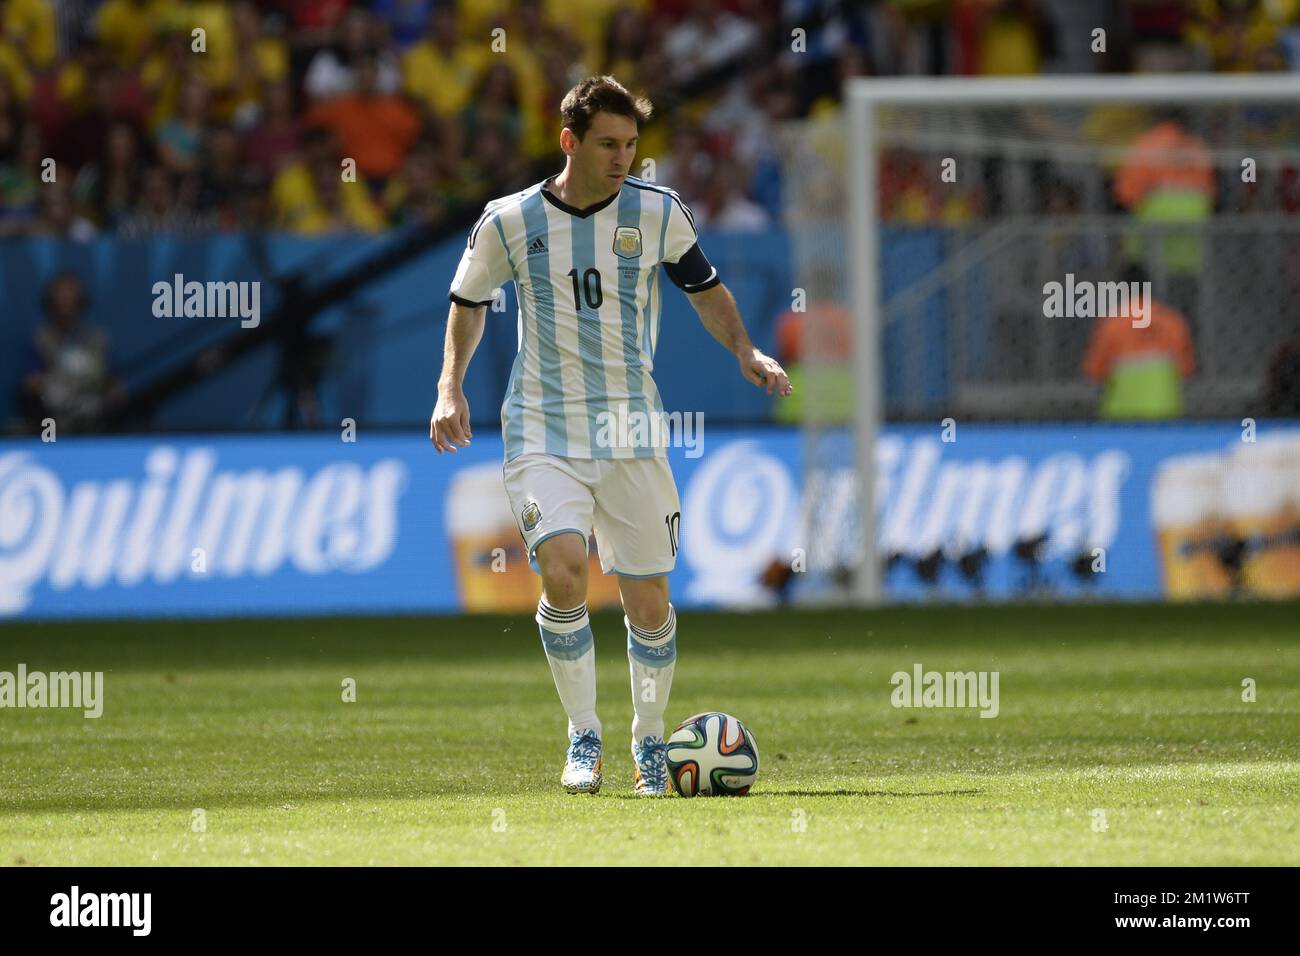 Argentina's Lionel Messi pictured in action during the quarter final match between Belgian national soccer team Red Devils and Argentina, in Estadio Nacional Mane Garrincha, in Brasilia, Brazil, during the 2014 FIFA World Cup, Saturday 05 July 2014.  BELGA PHOTO DIRK WAEM Stock Photo